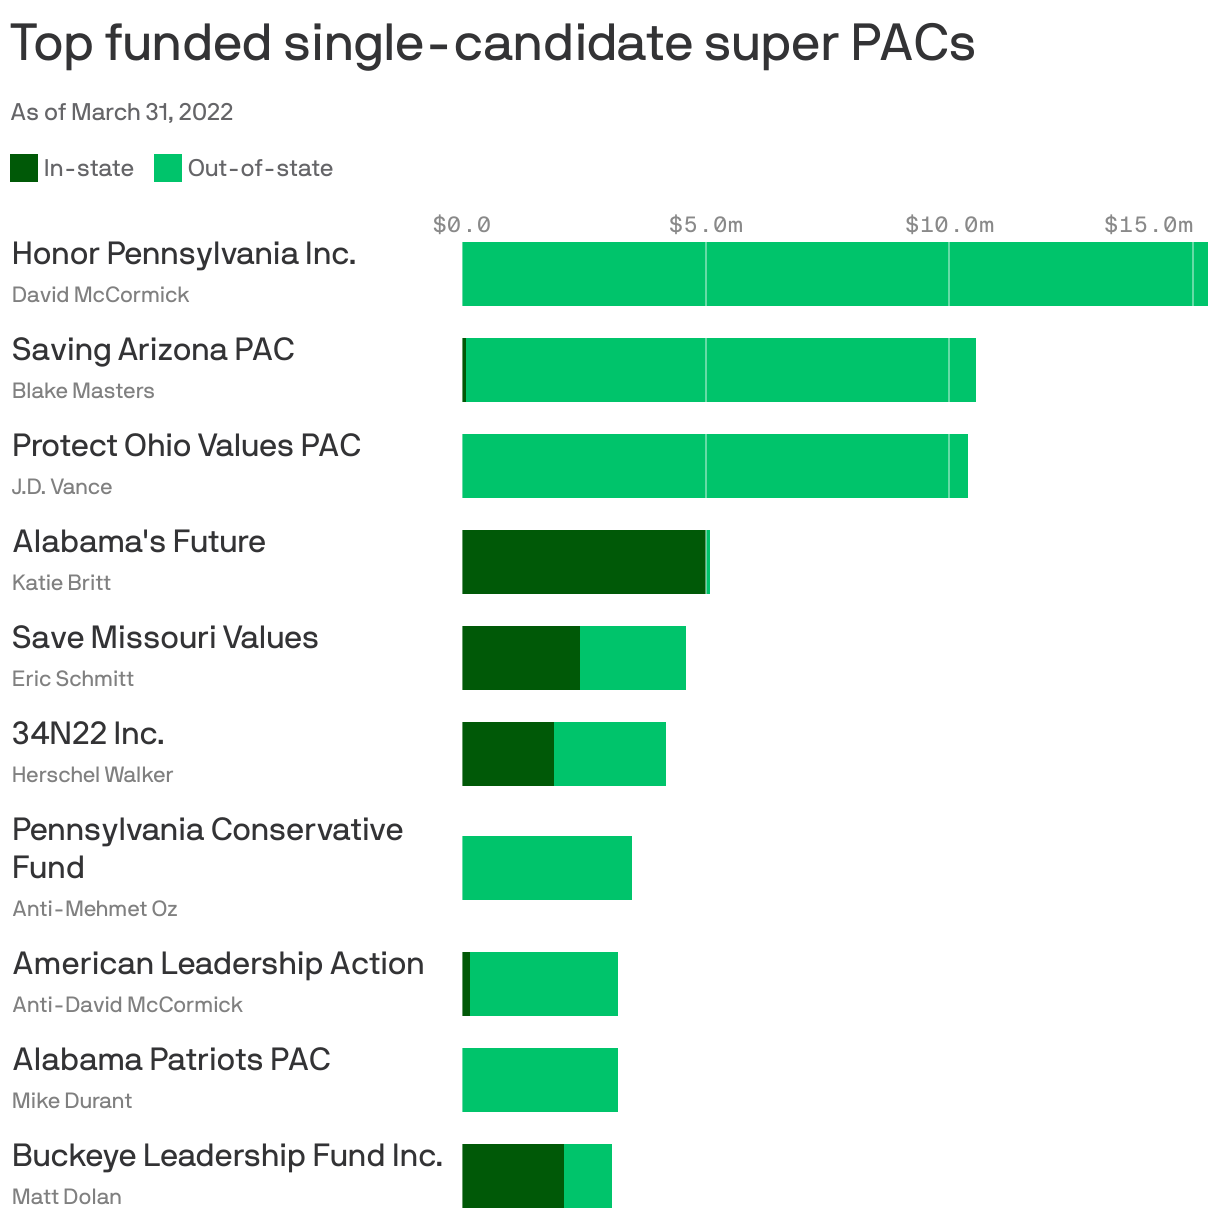 Top funded single-candidate super PACs